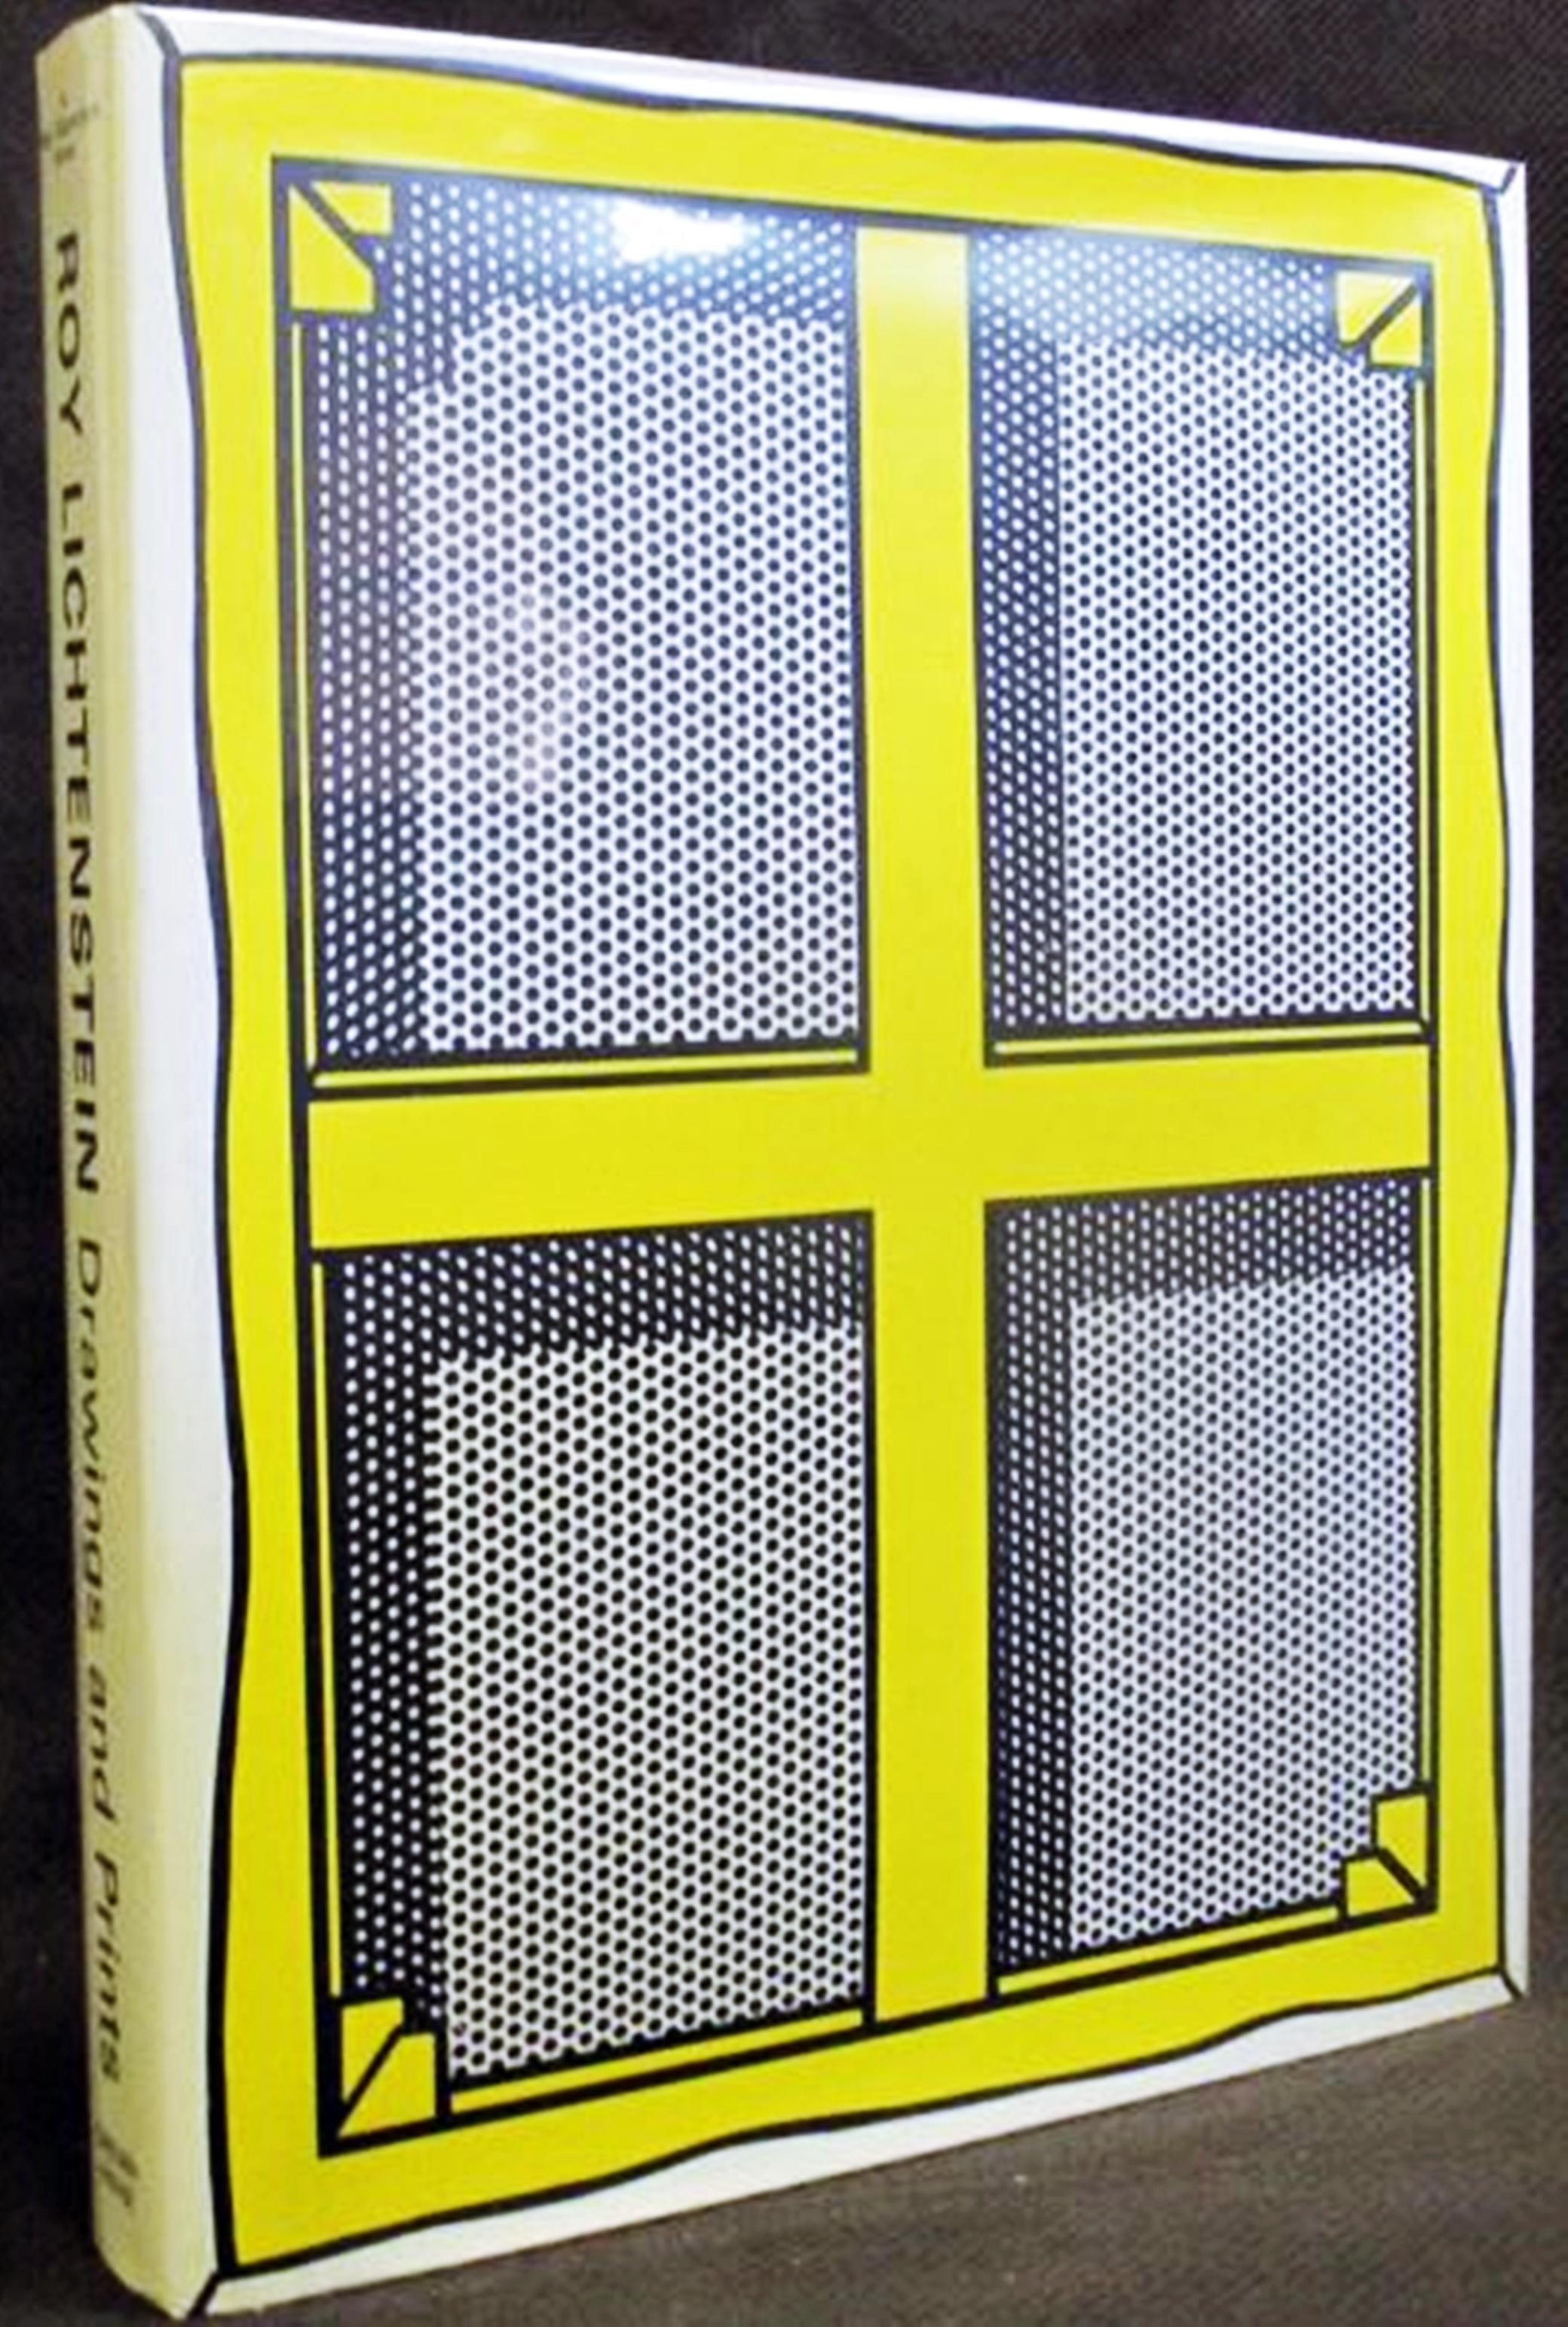 Hardback monograph of drawings and prints hand signed and inscribed by artist - Pop Art Art by Roy Lichtenstein